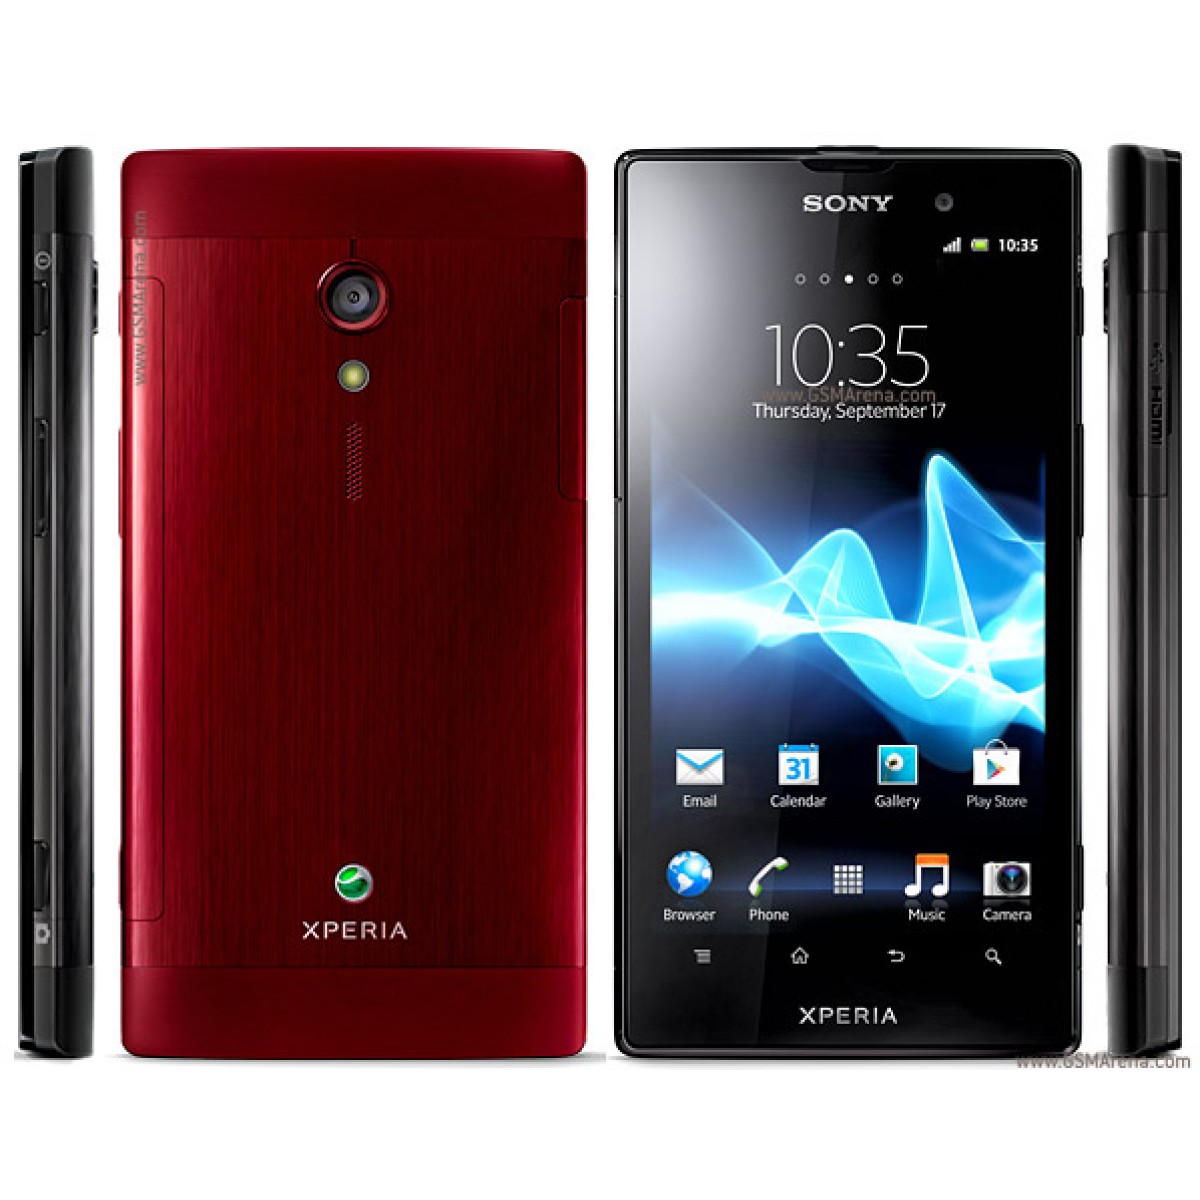 Sony_xperia_Ion_android_mobile_phone_touchscreen_images_and_photos_feature_9